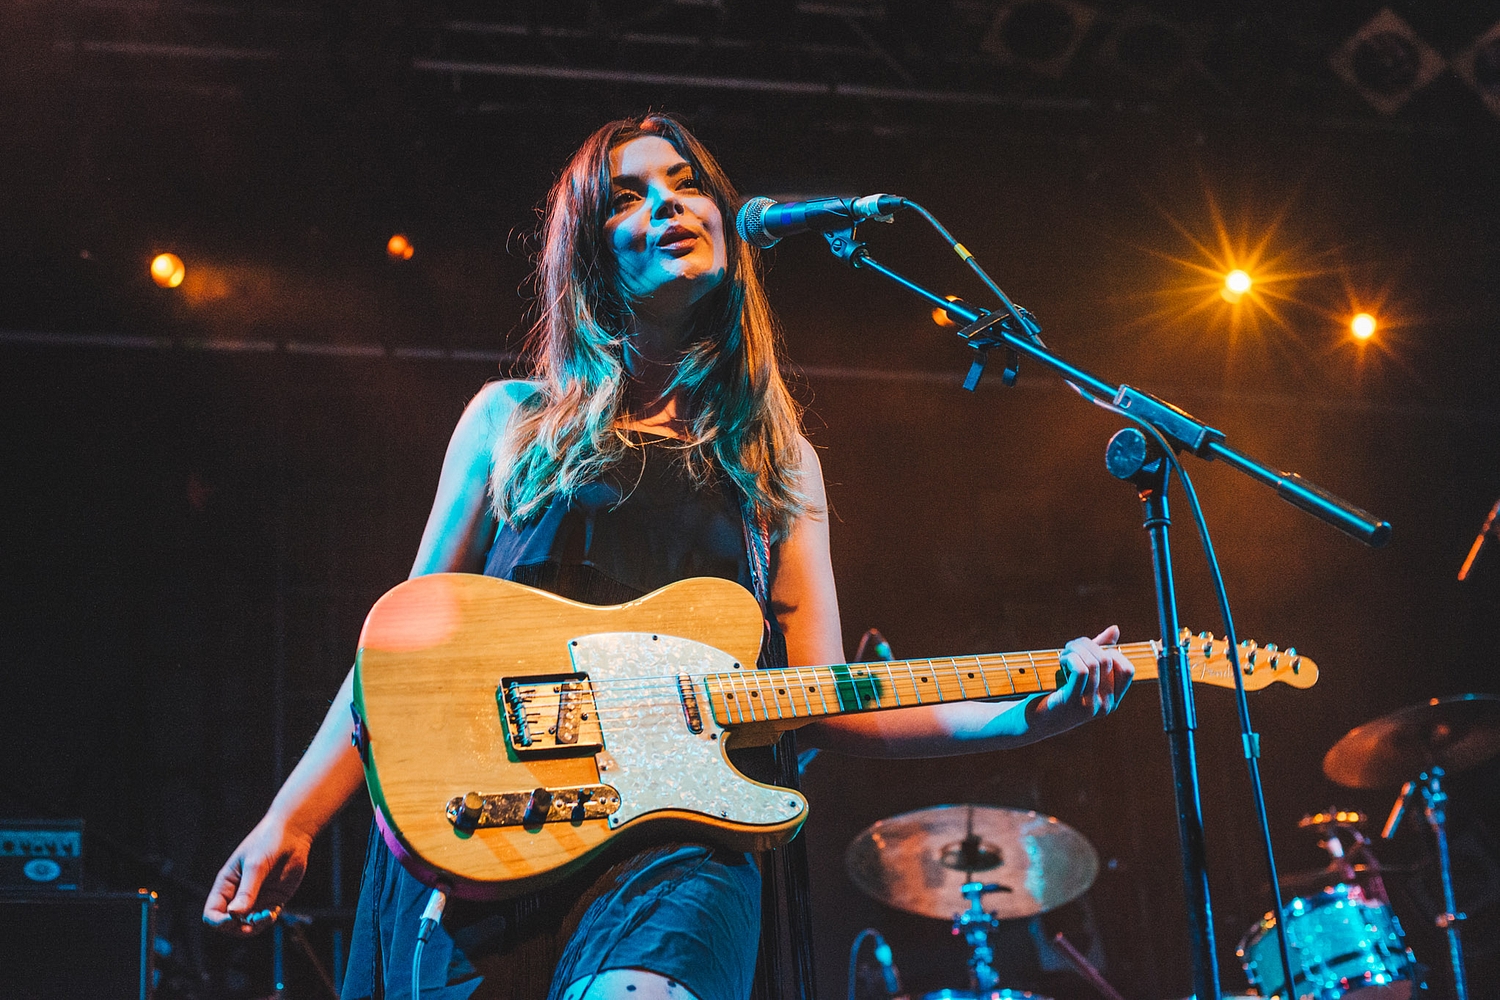 Honeyblood, Dream Wife & Eat Fast join Live at Leeds 2017 line-up